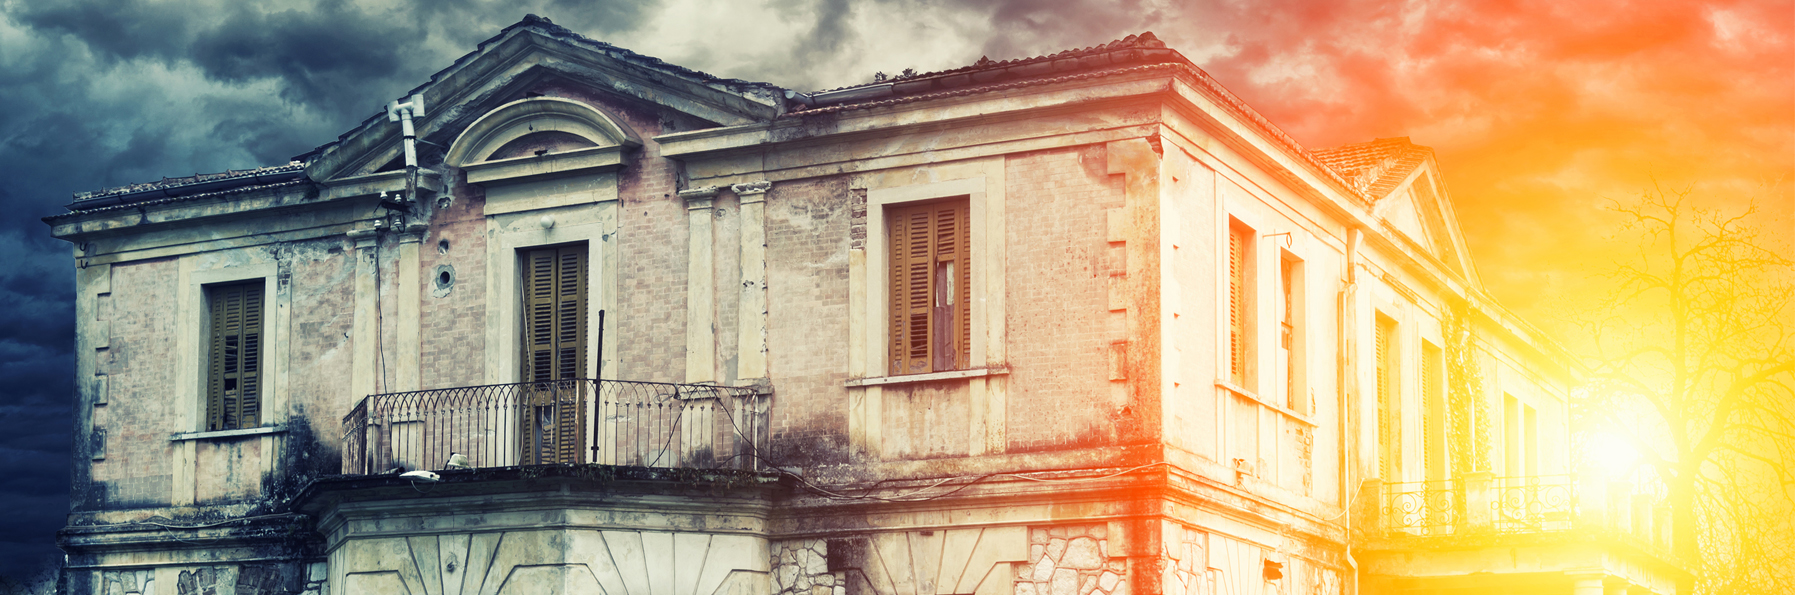 Four Ways to Avoid Buying a Haunted House Image